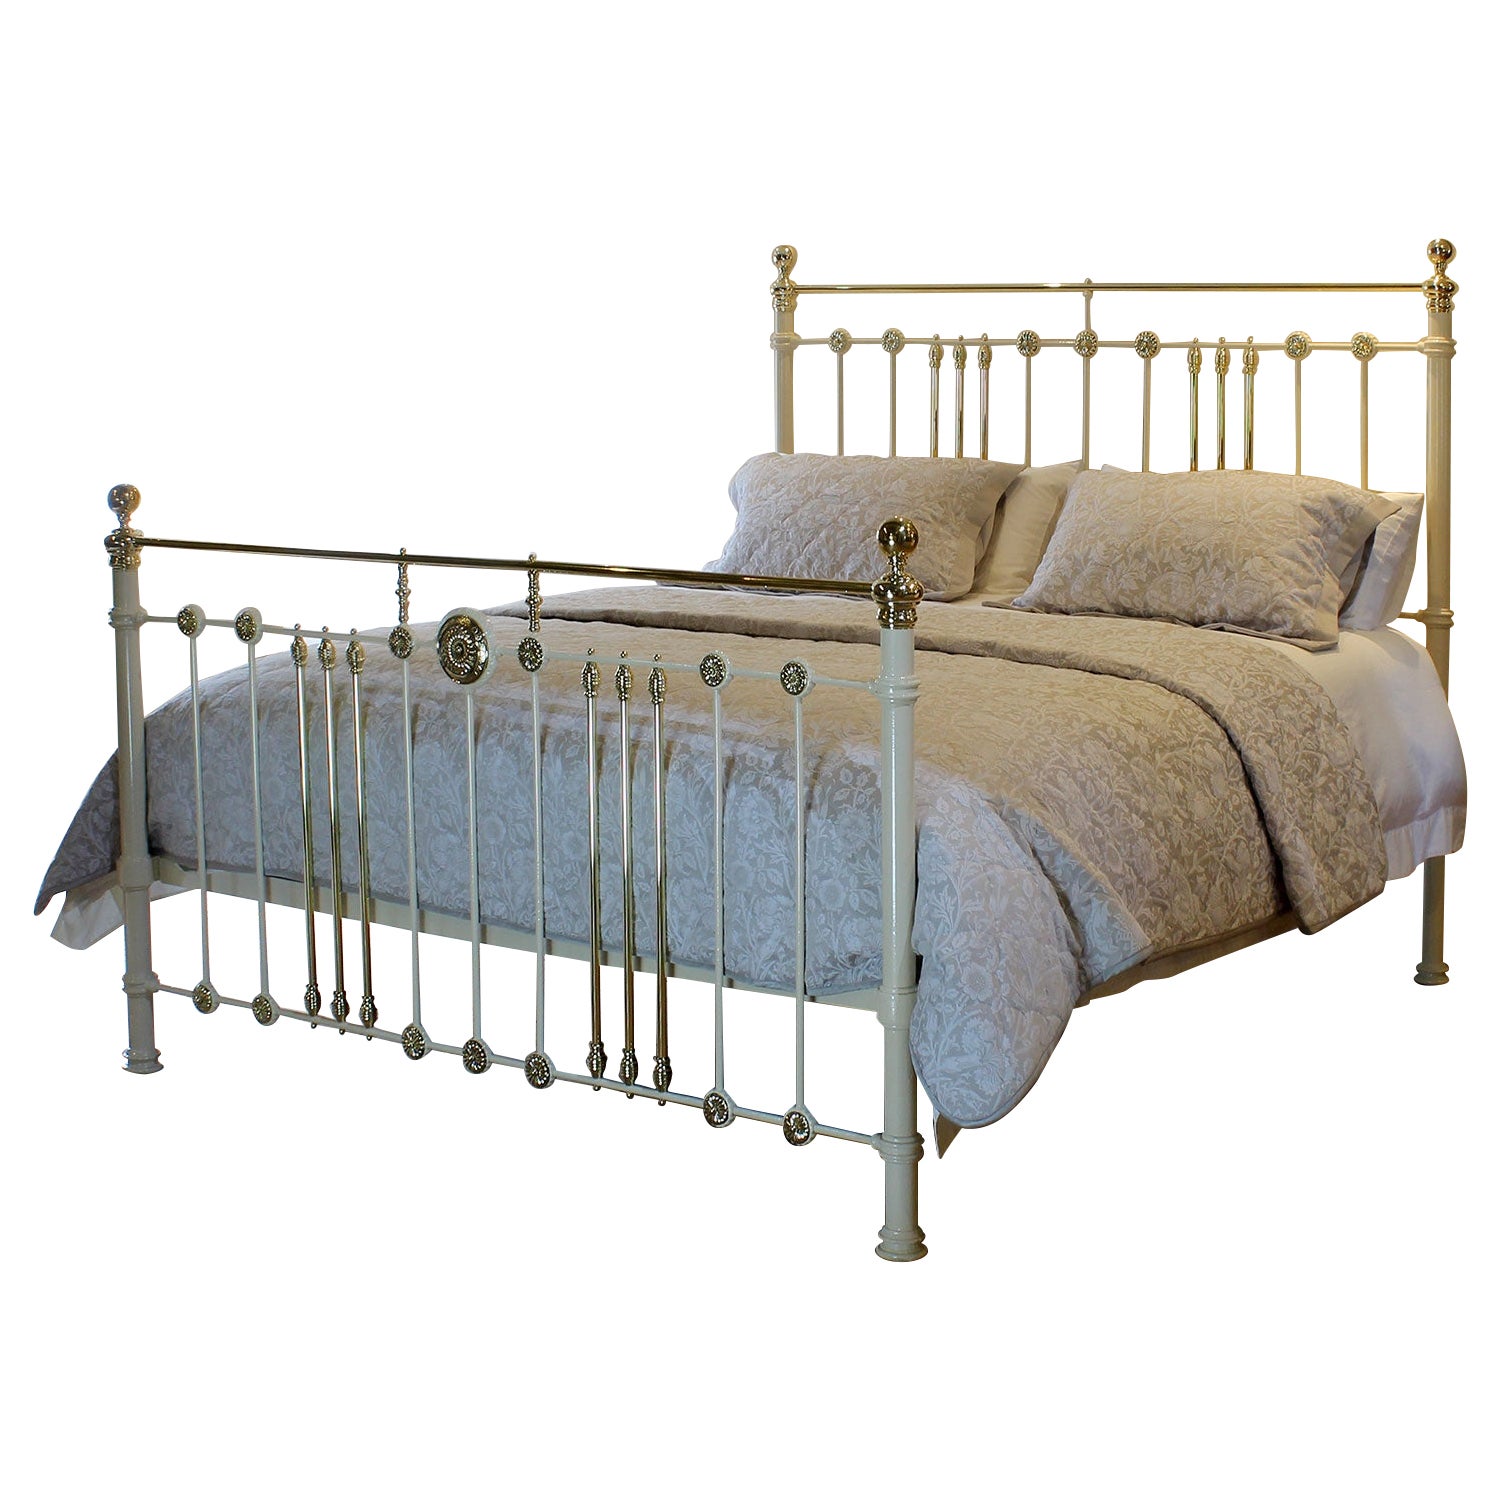 Extra Wide Brass and Iron Antique Bed in Cream with Rosette Decoration, MSK82